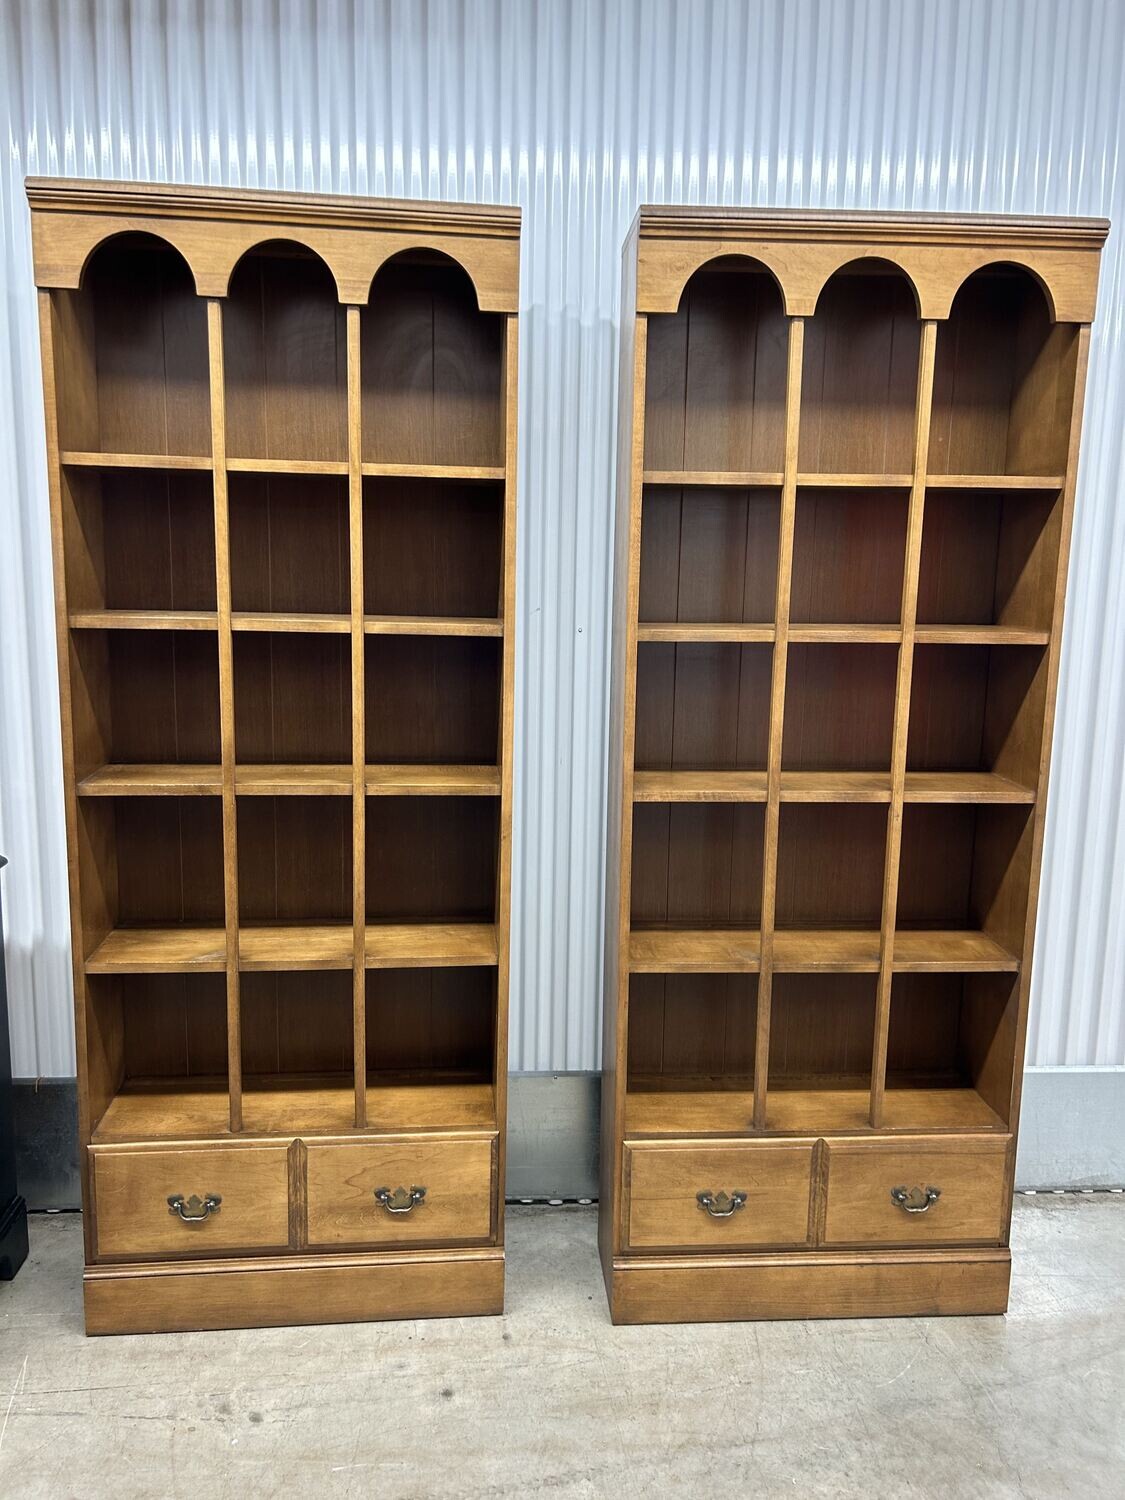 Vintage Maple Bookcase with arch &amp; grid design, EACH #2103 ** 3 days to sell, full price